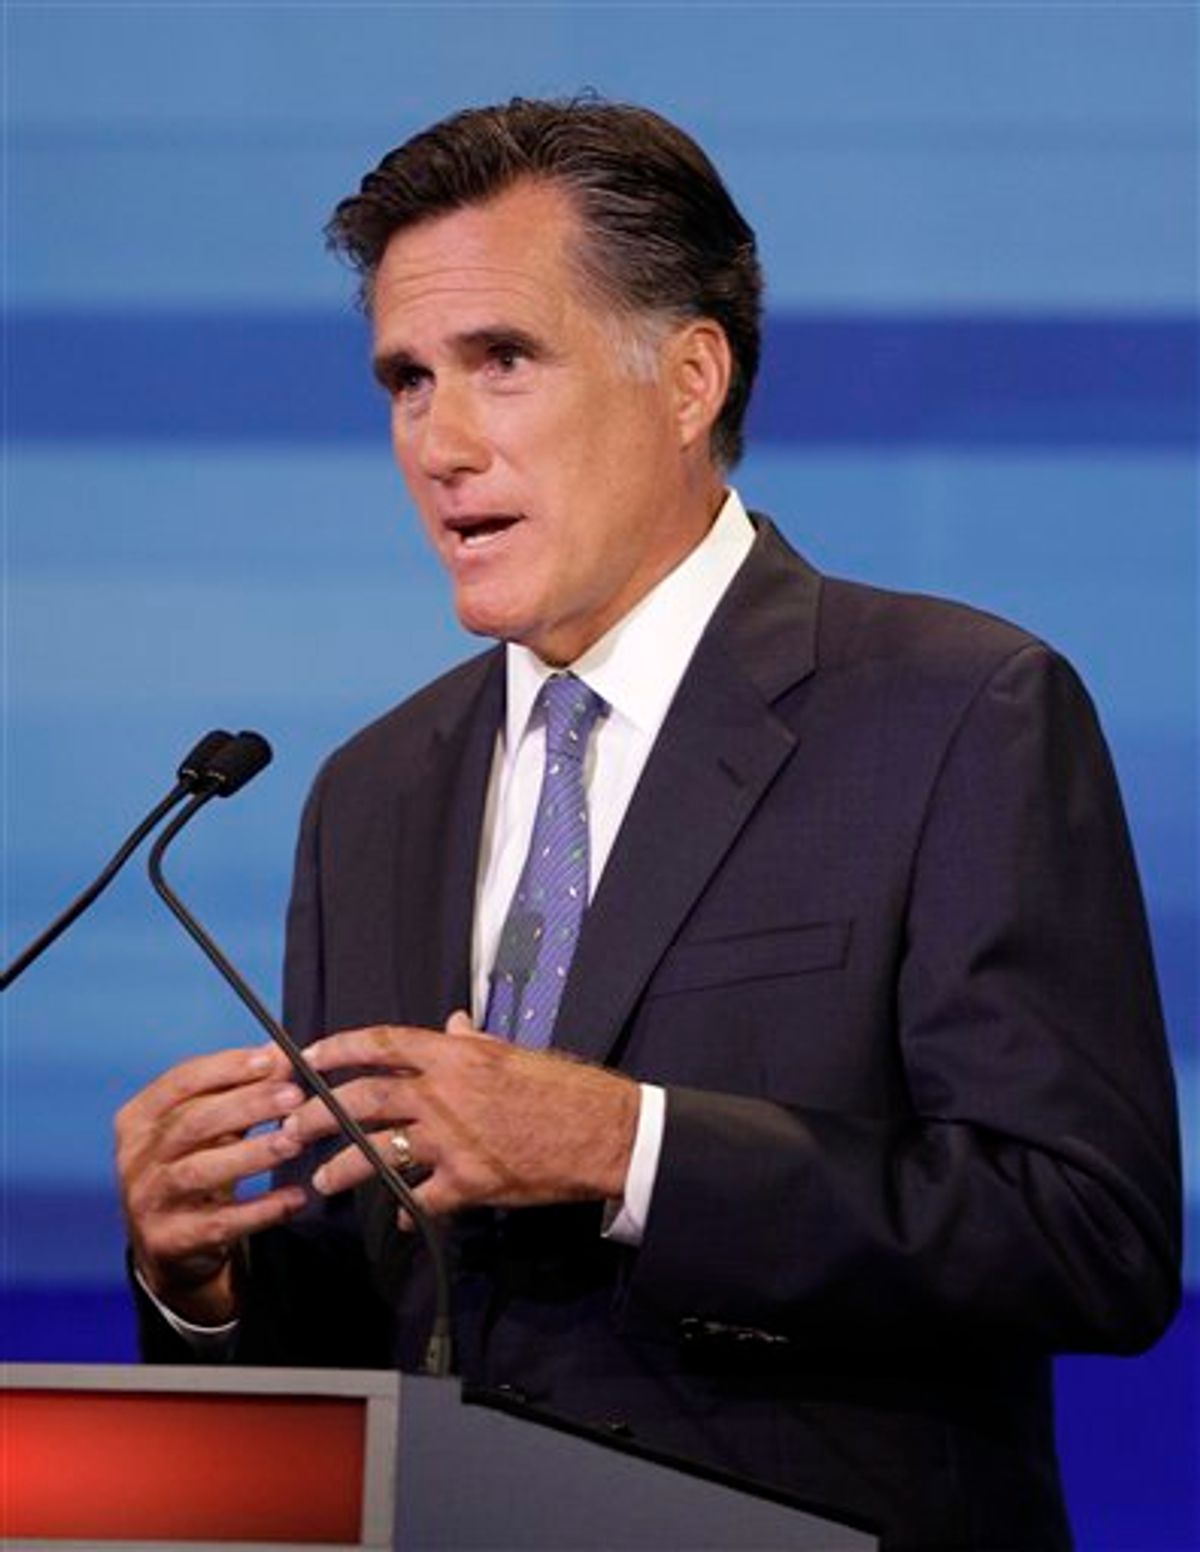 Republican presidential candidate former Massachusetts Gov. Mitt Romney speaks during the Iowa GOP/Fox News Debate at the CY Stephens Auditorium in Ames, Iowa, Thursday, Aug. 11, 2011. (AP Photo/Charlie Neibergall, Pool) (AP)